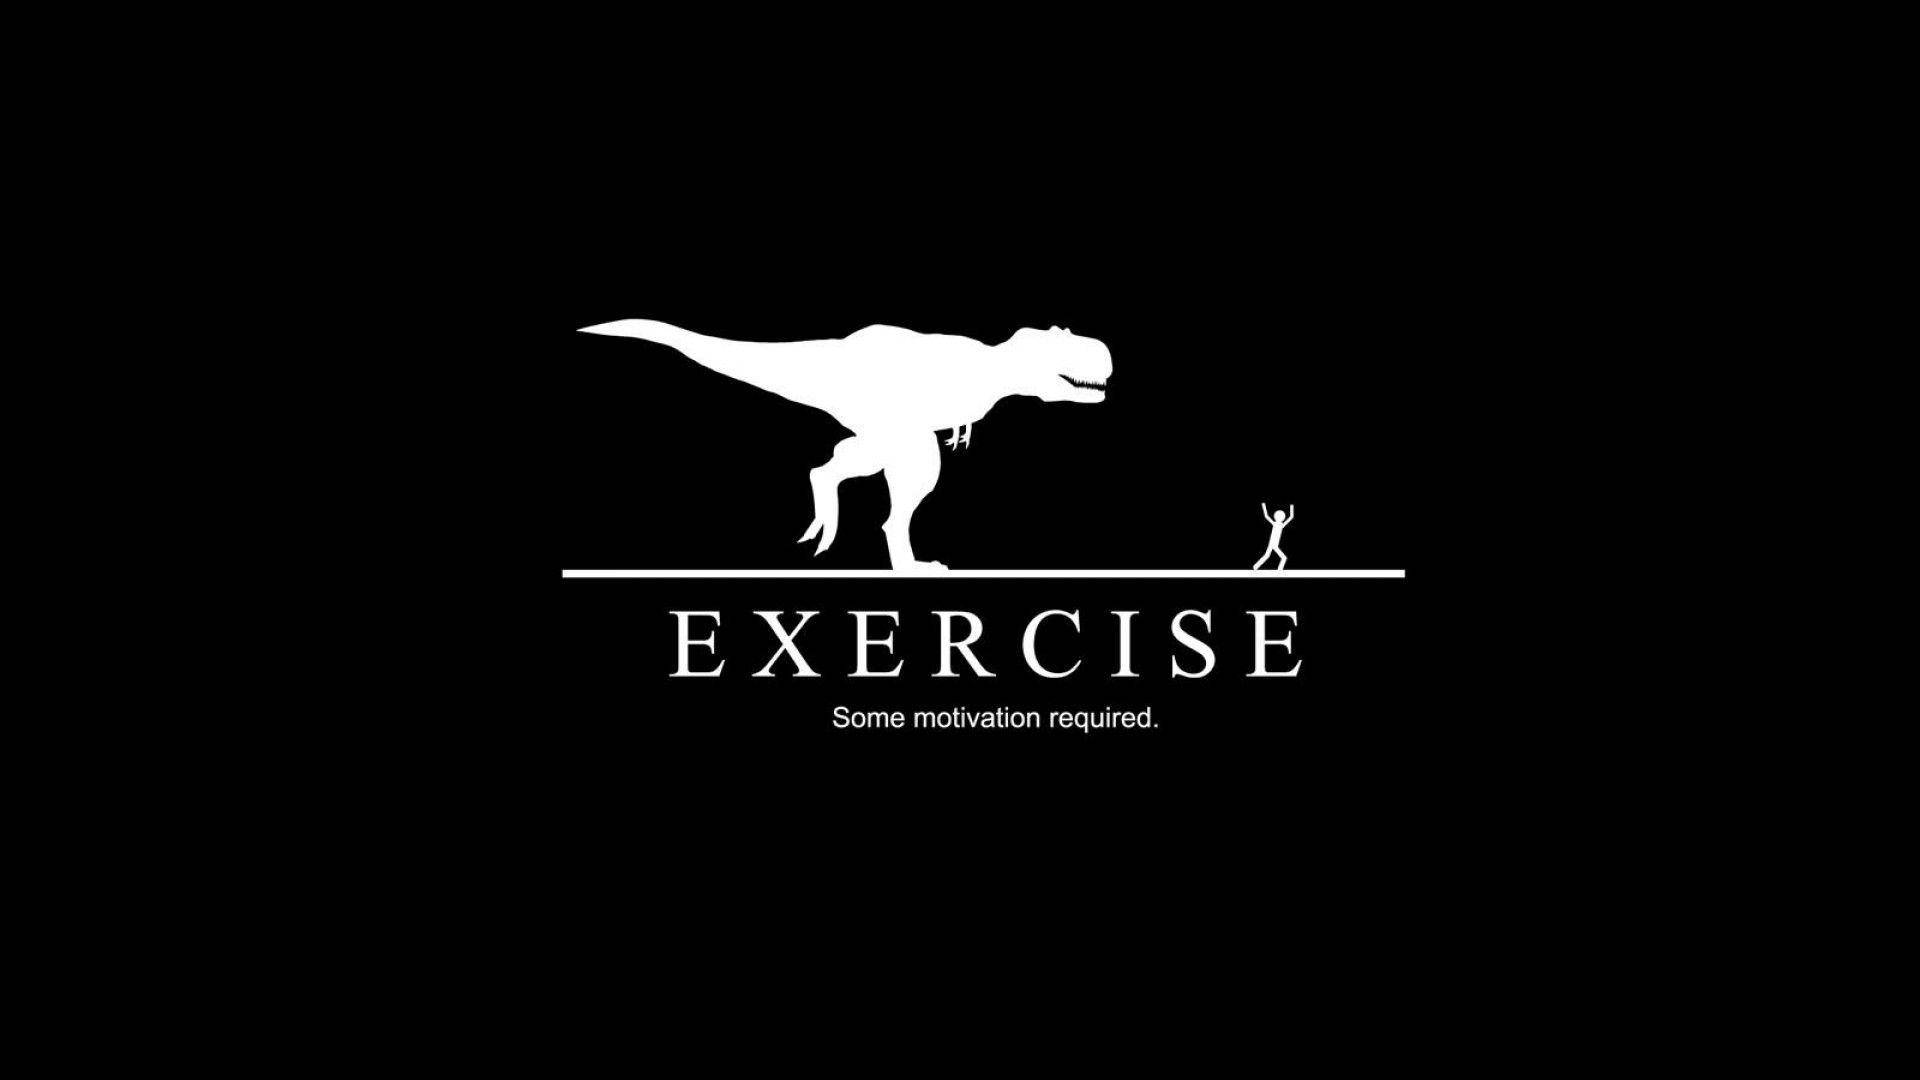 Cool Funny Exercise Motivation Background